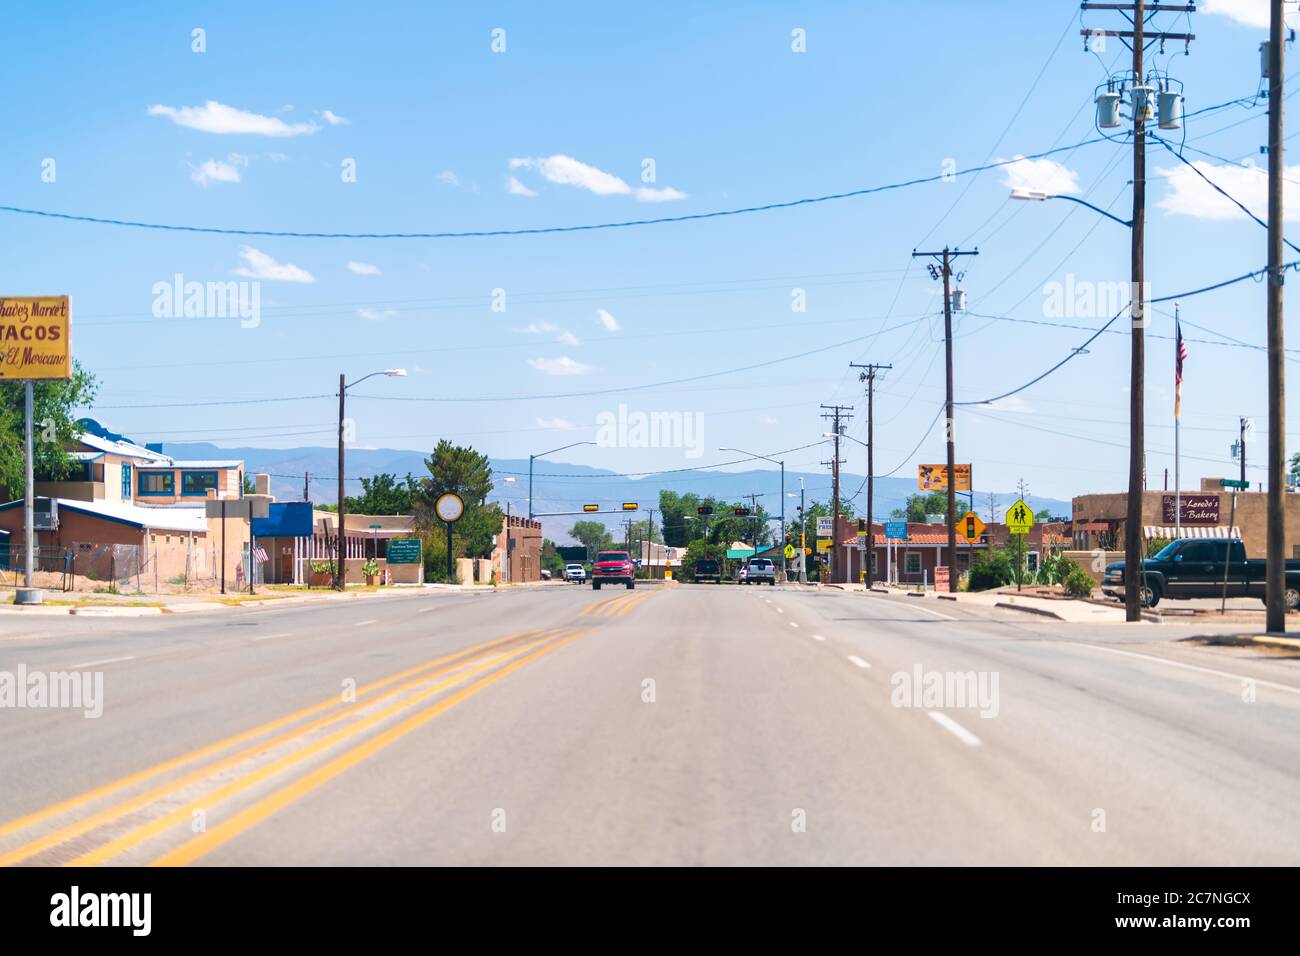 Tularosa, USA - June 8, 2019: New Mexico countryside small city town street road with stores shops buildings and mountains in background Stock Photo